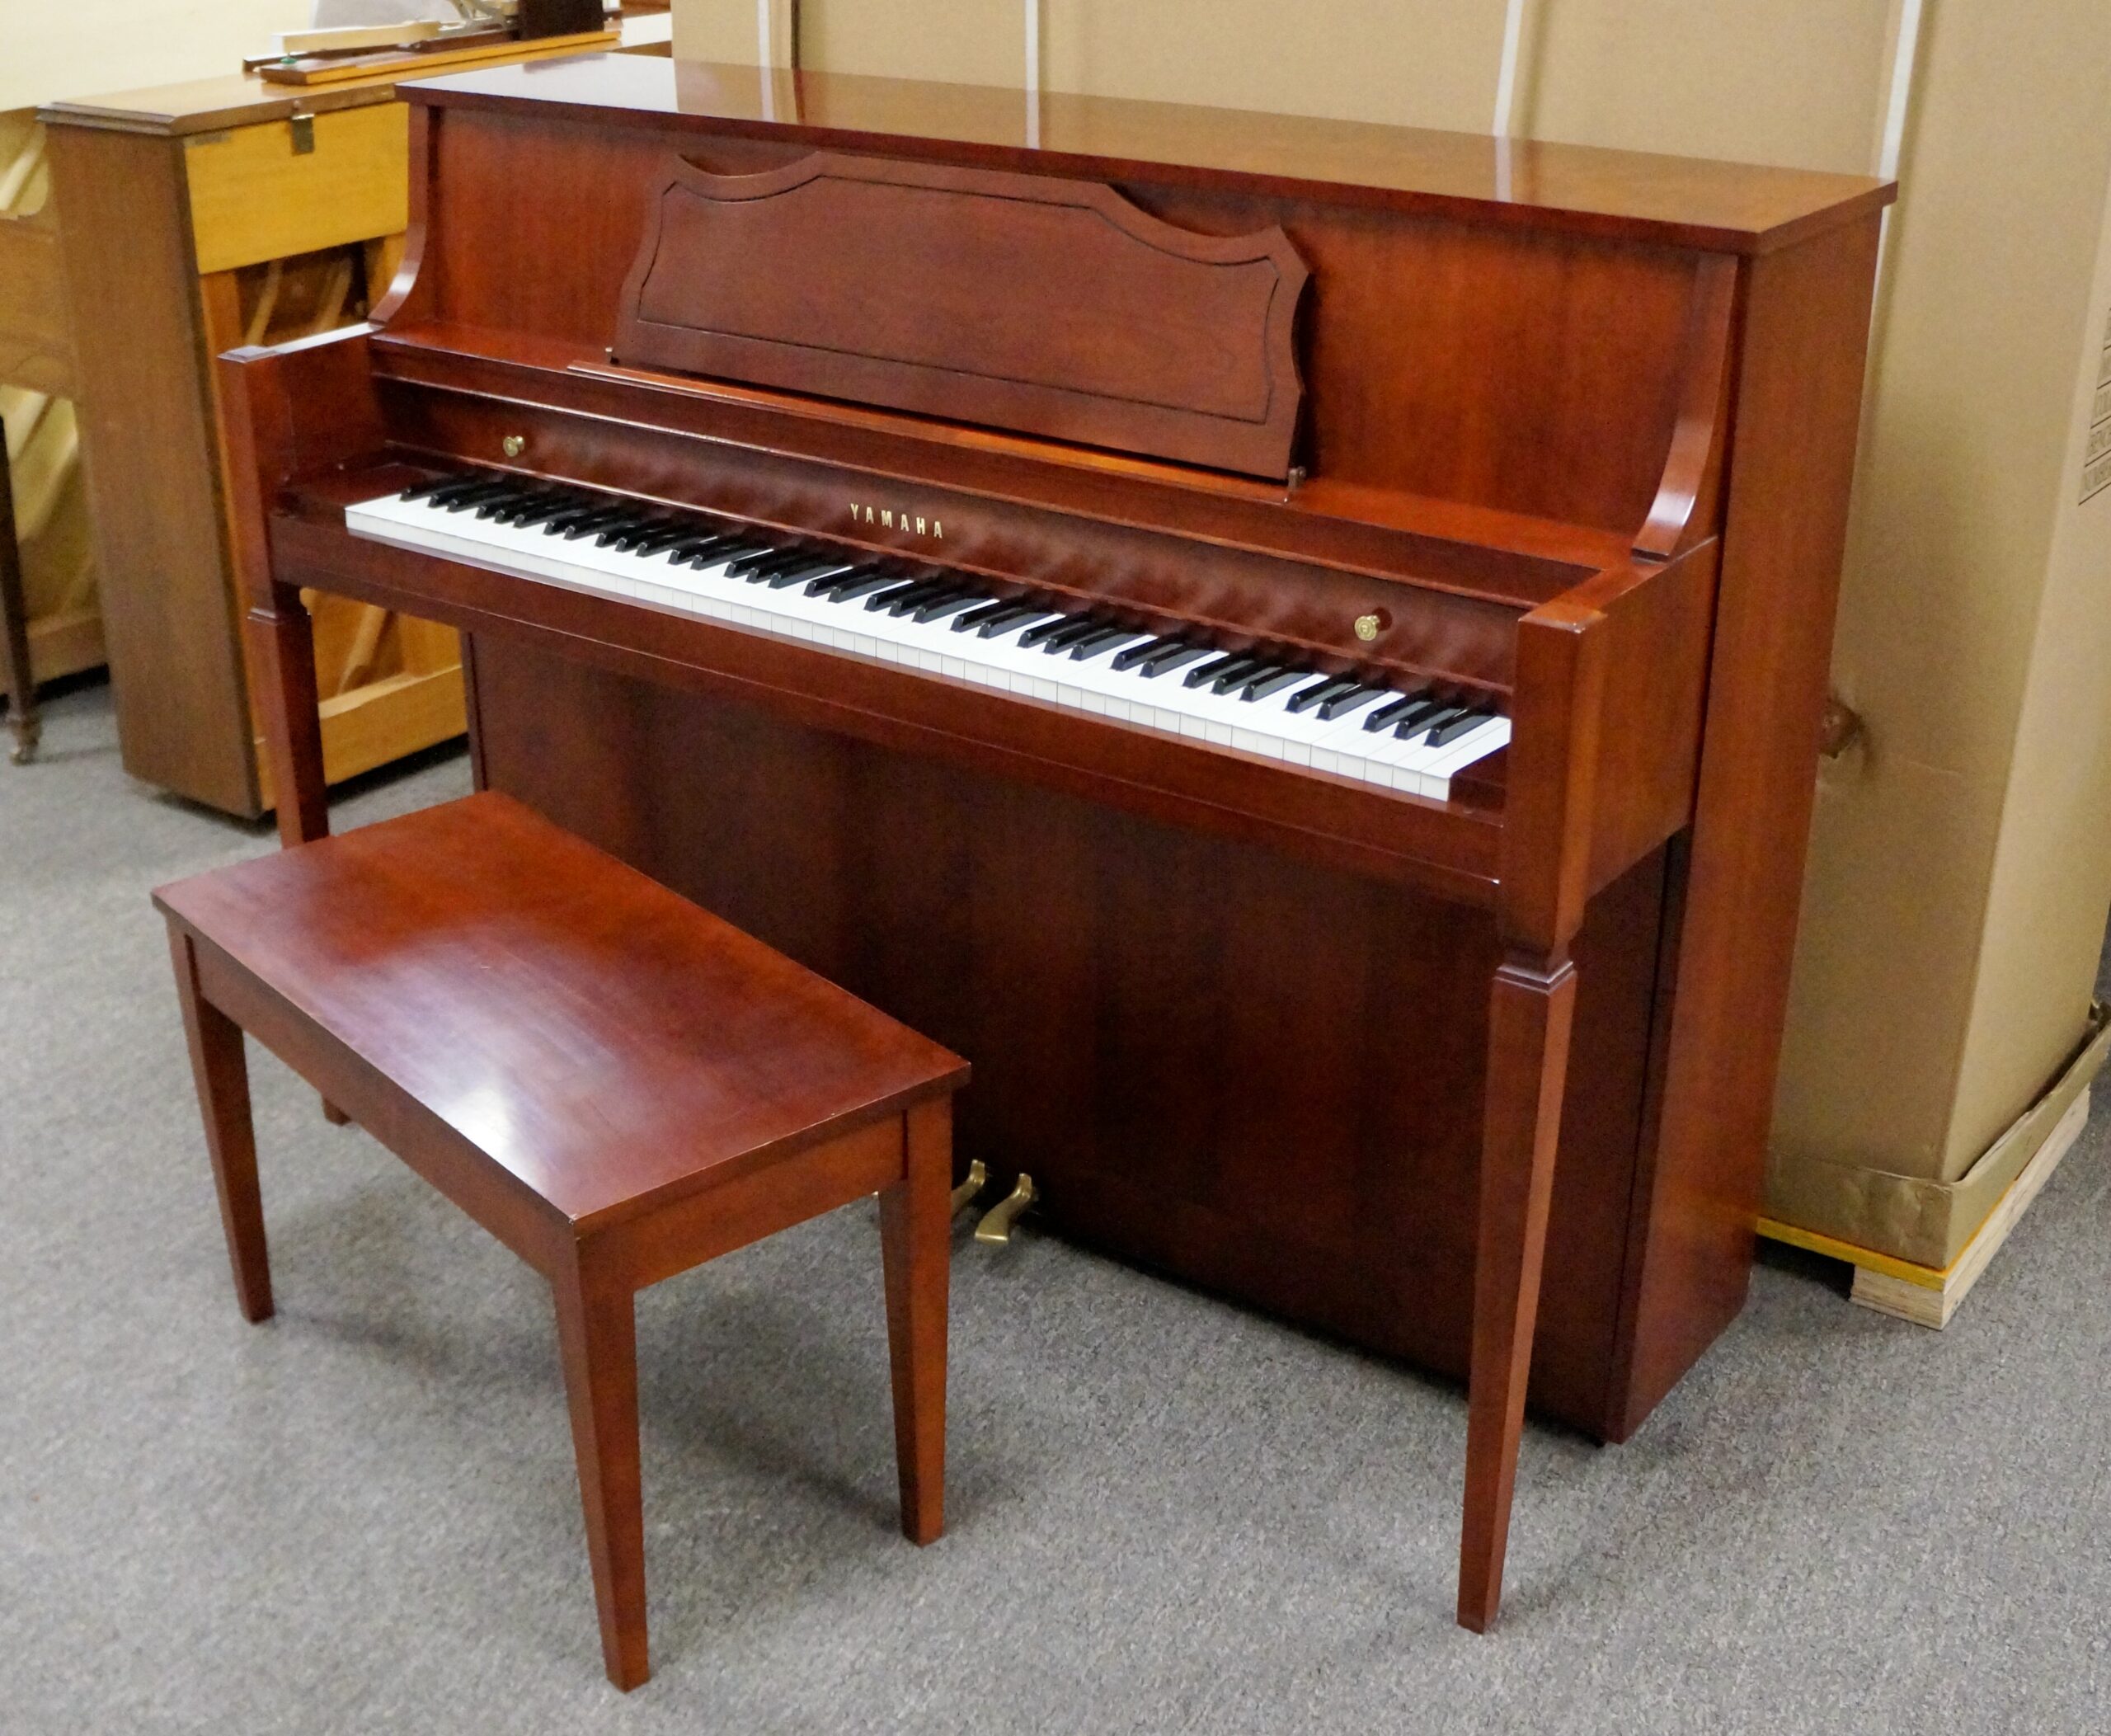 
Where Was the Piano Invented? Uncovering the Fascinating History Behind This Beloved Instrument